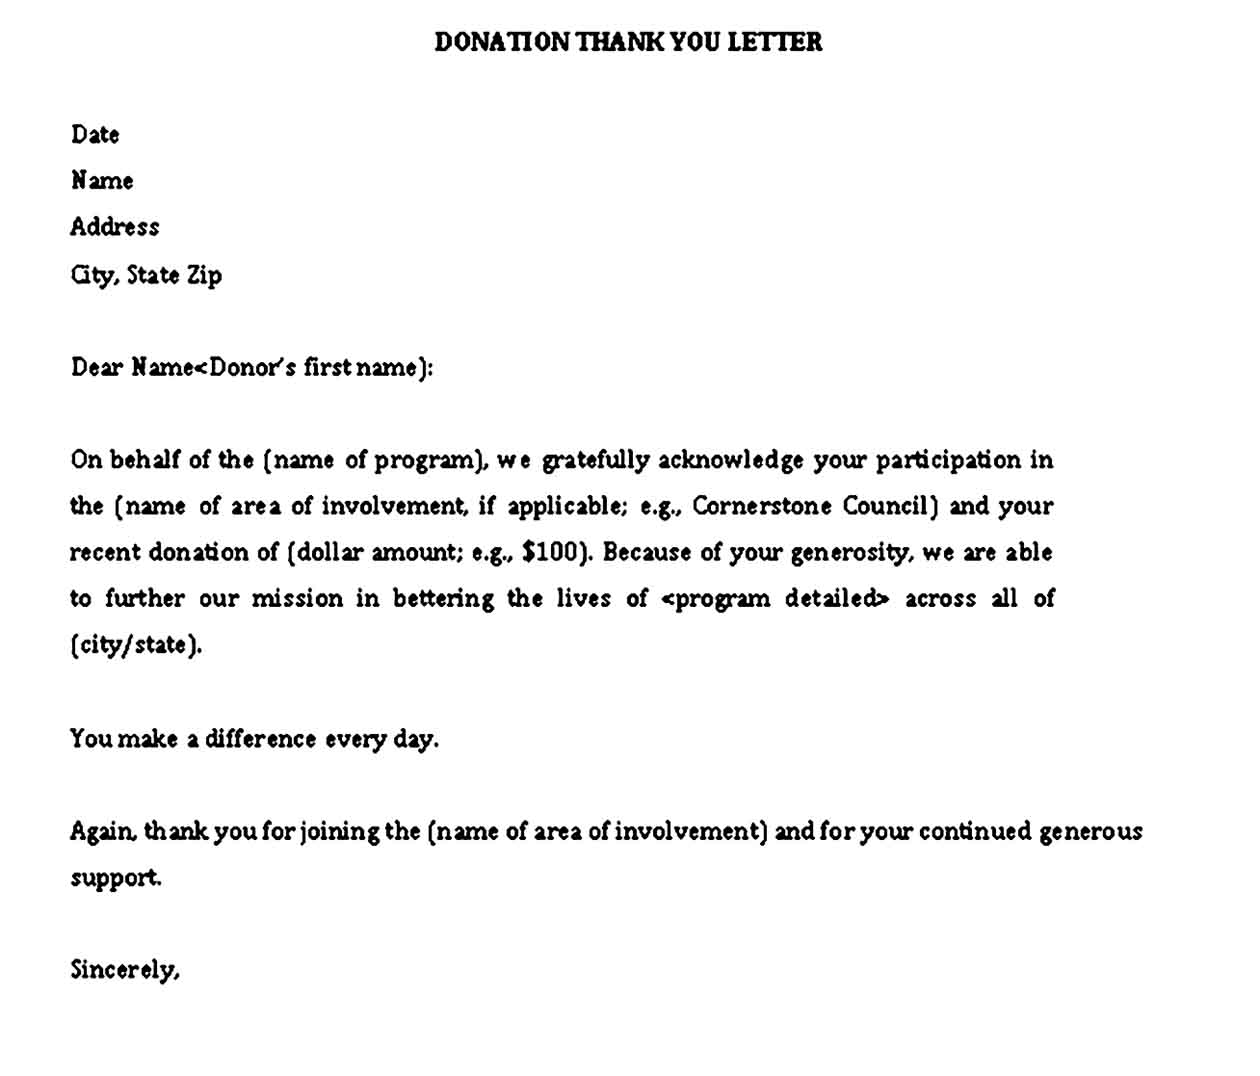 DONATION THANK YOU LETTER